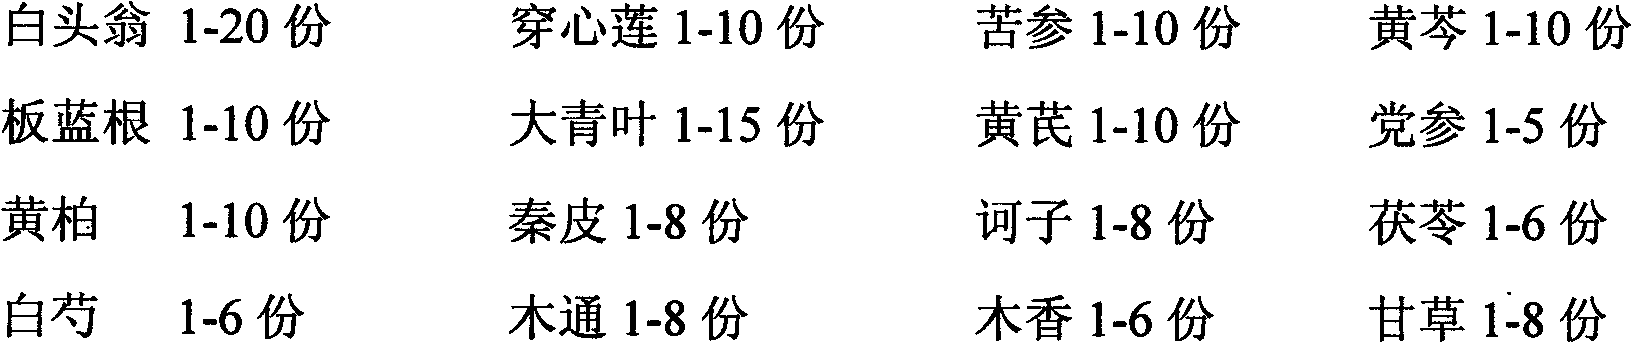 Traditional Chinese medicine composition for preventing and treating suckling piglet diarrhea